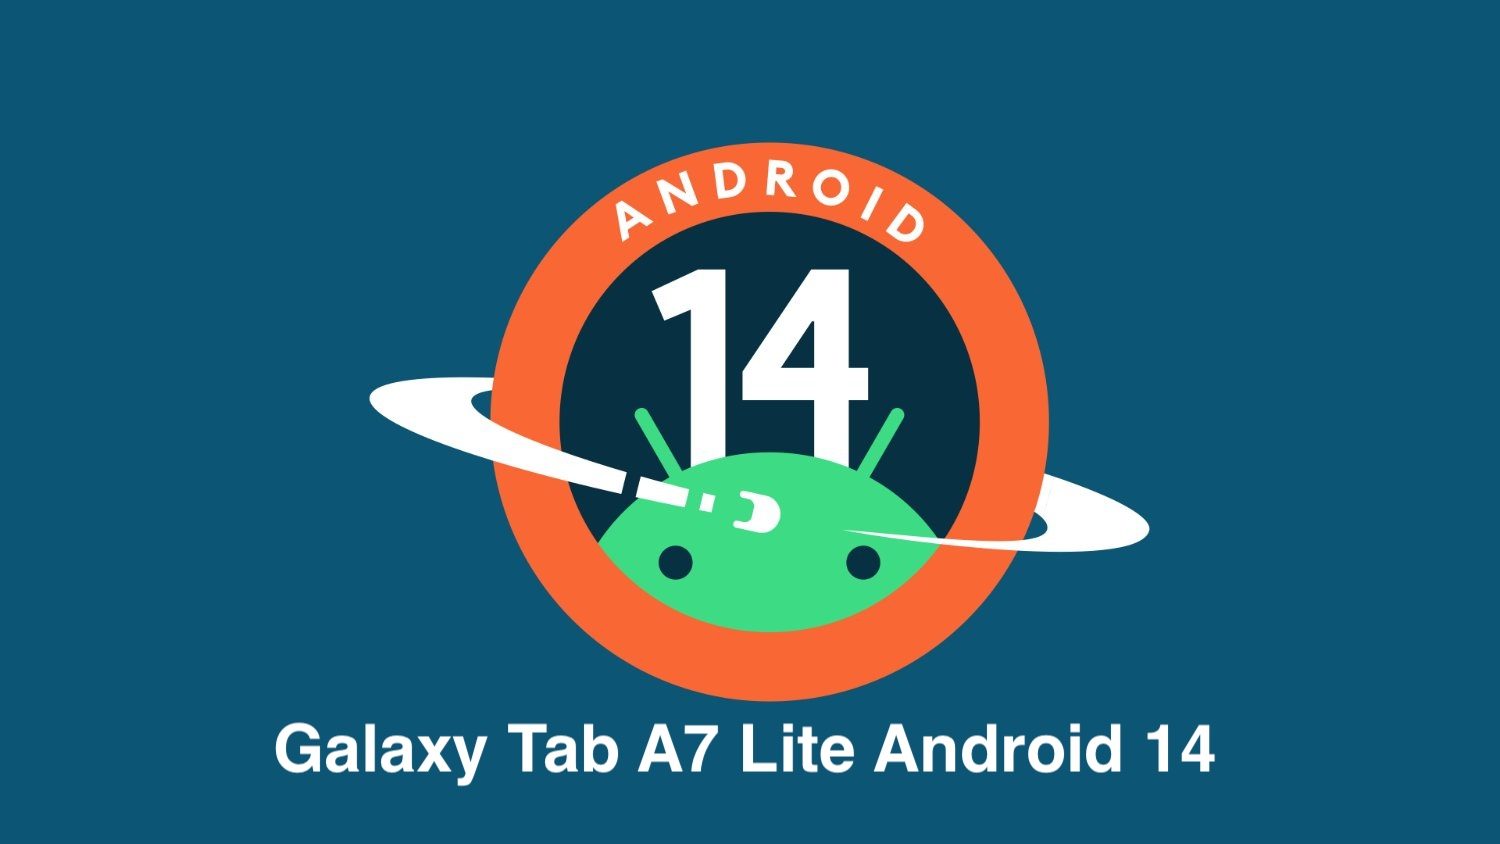 Android 14 for Galaxy Tab A7 Lite